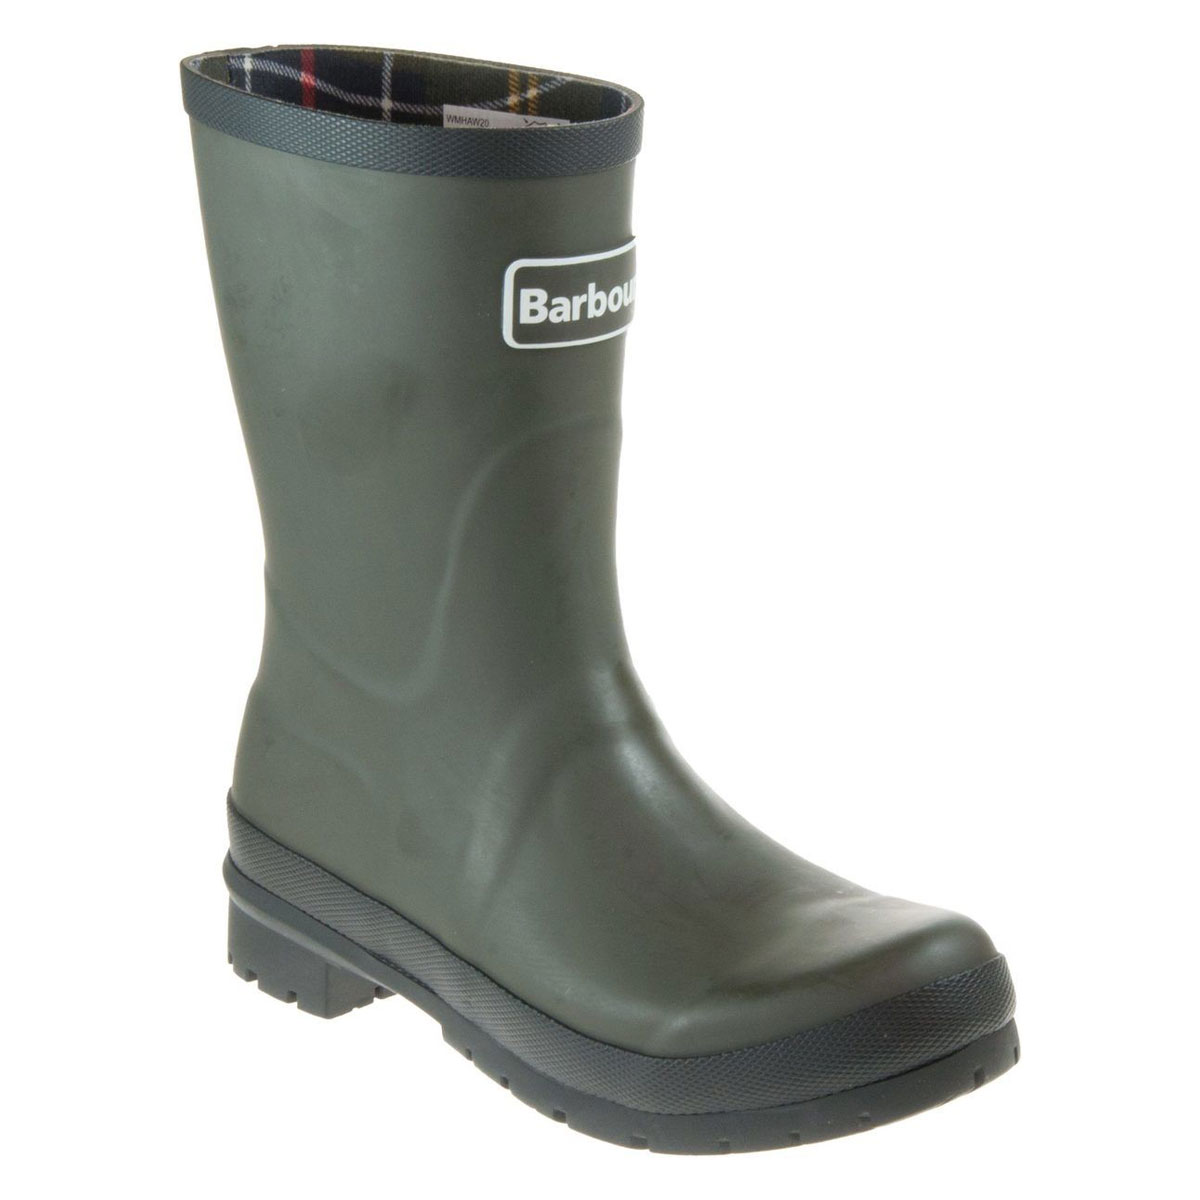 Barbour Banbury Wellie Olive Green Womens Mid Calf Boots LRF0084-OL11